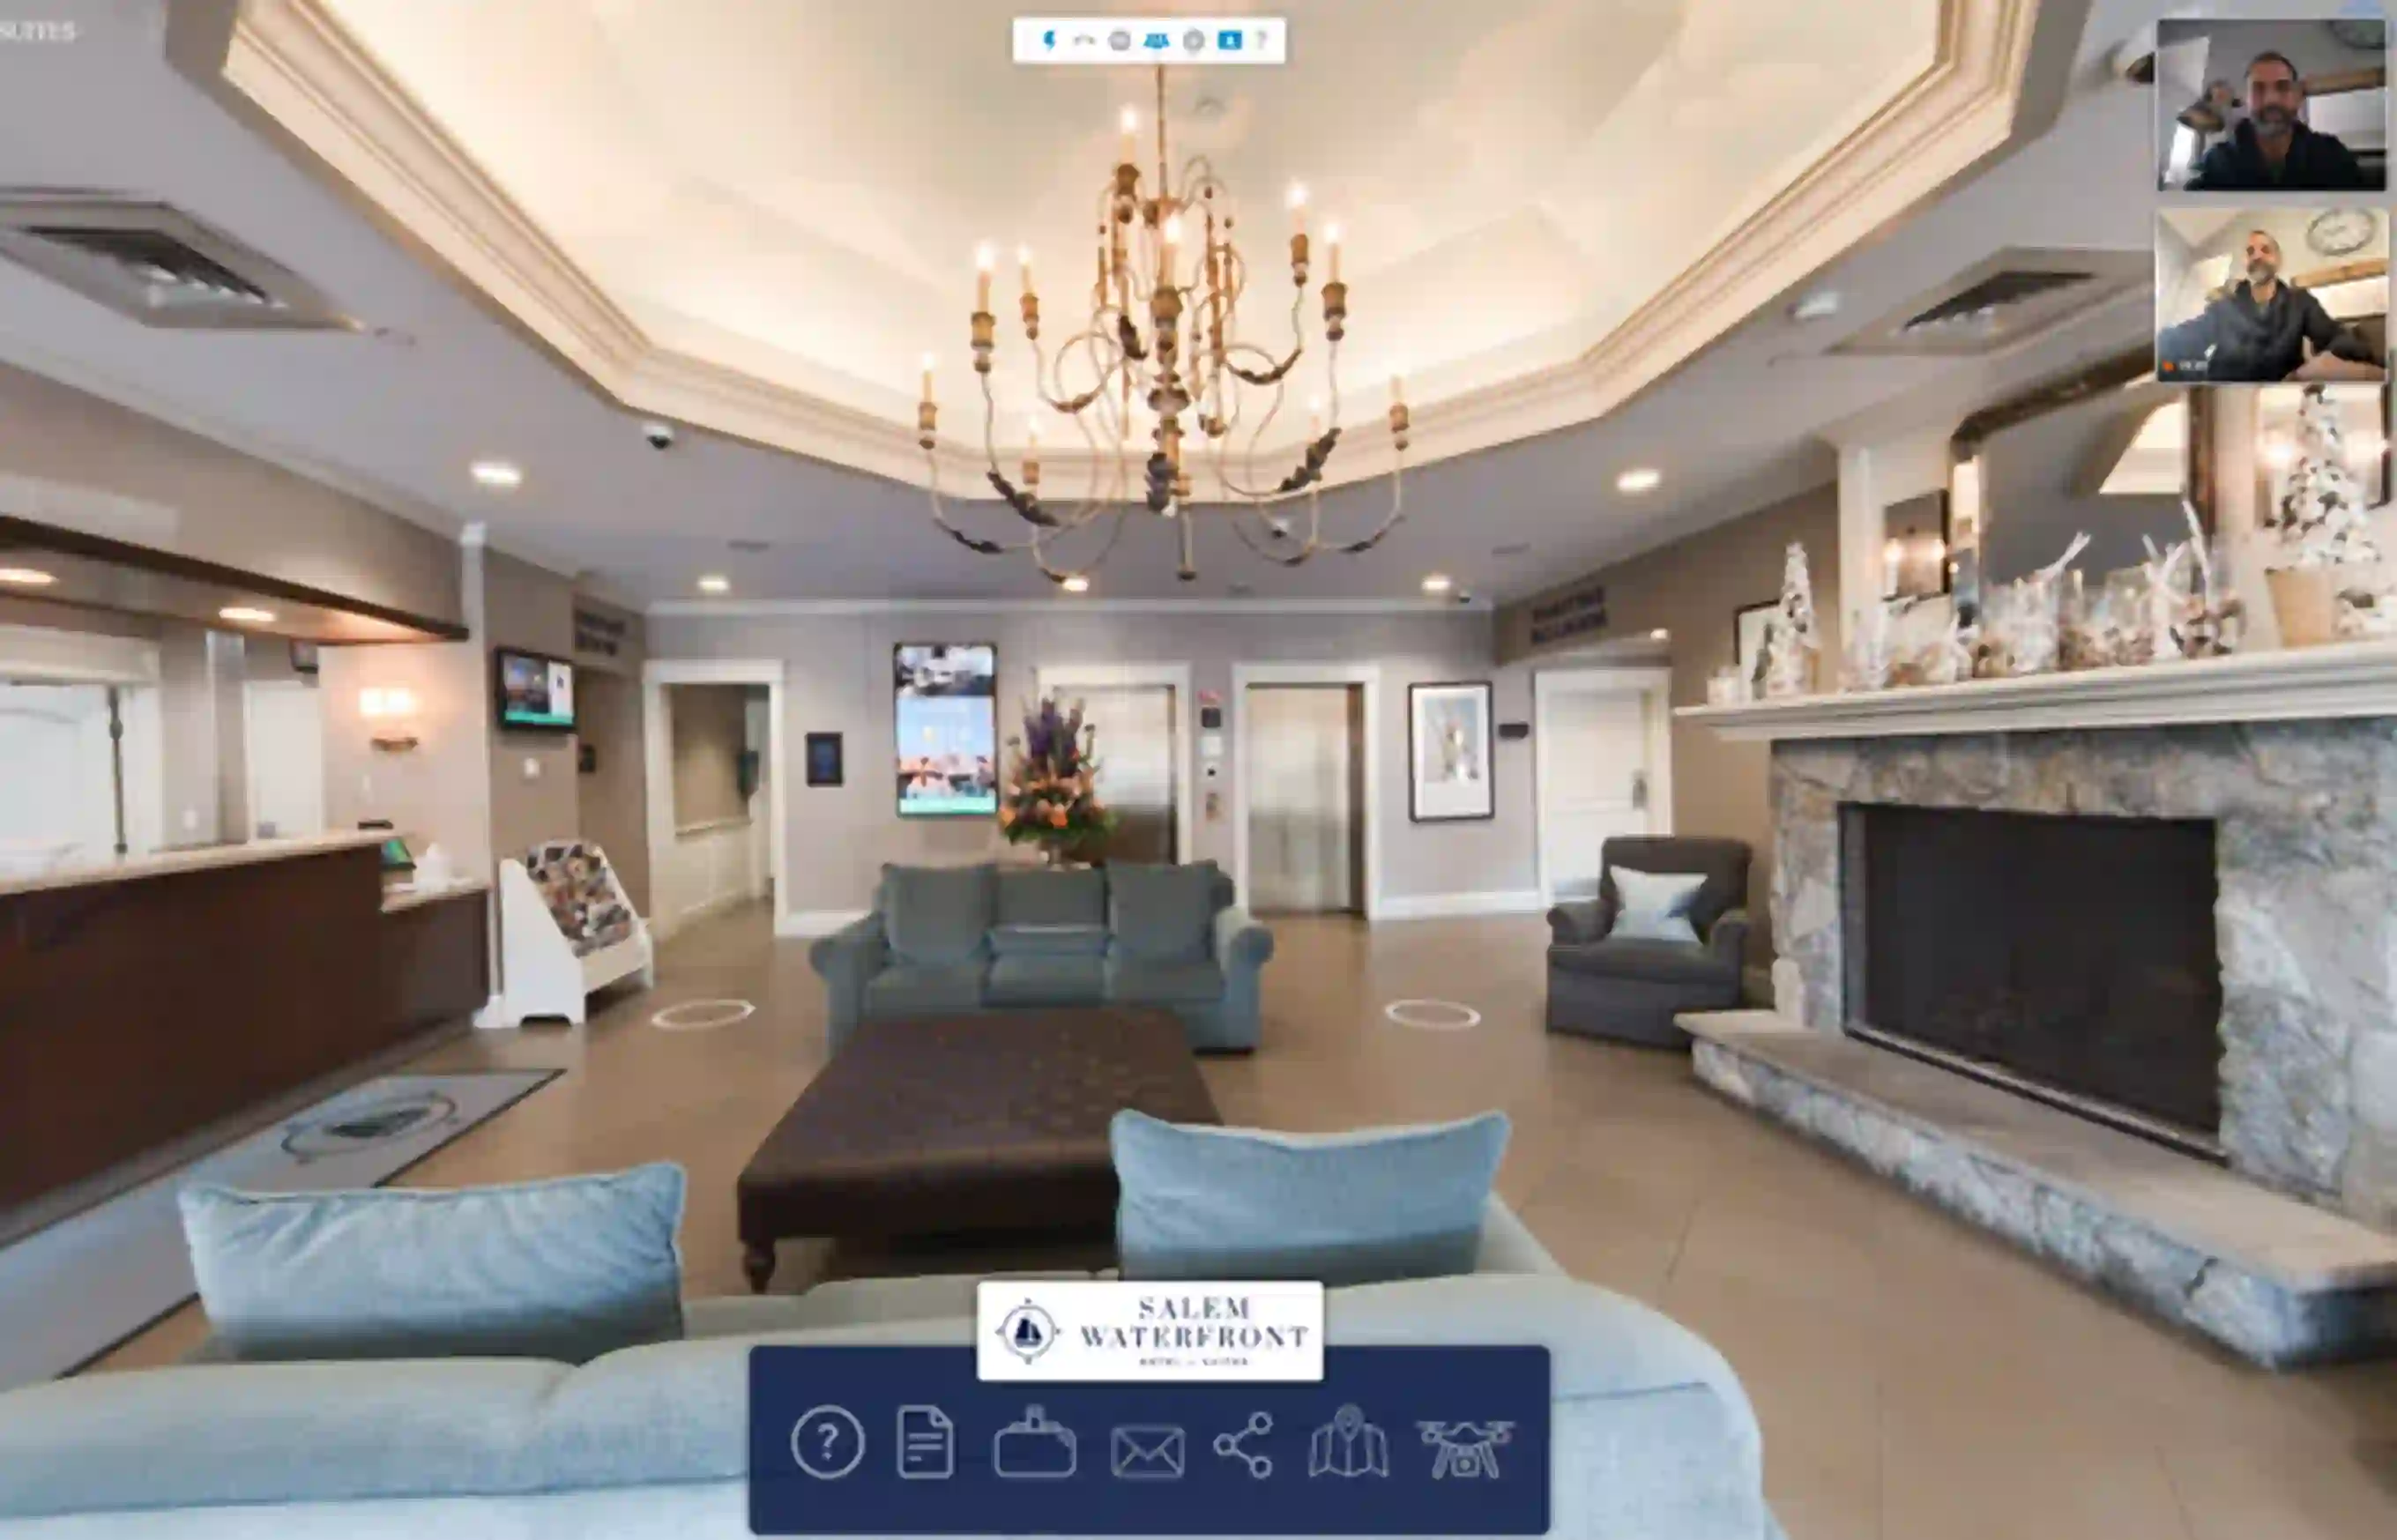 Video call in progress in Salem Waterfont Hotel Virtual Tour